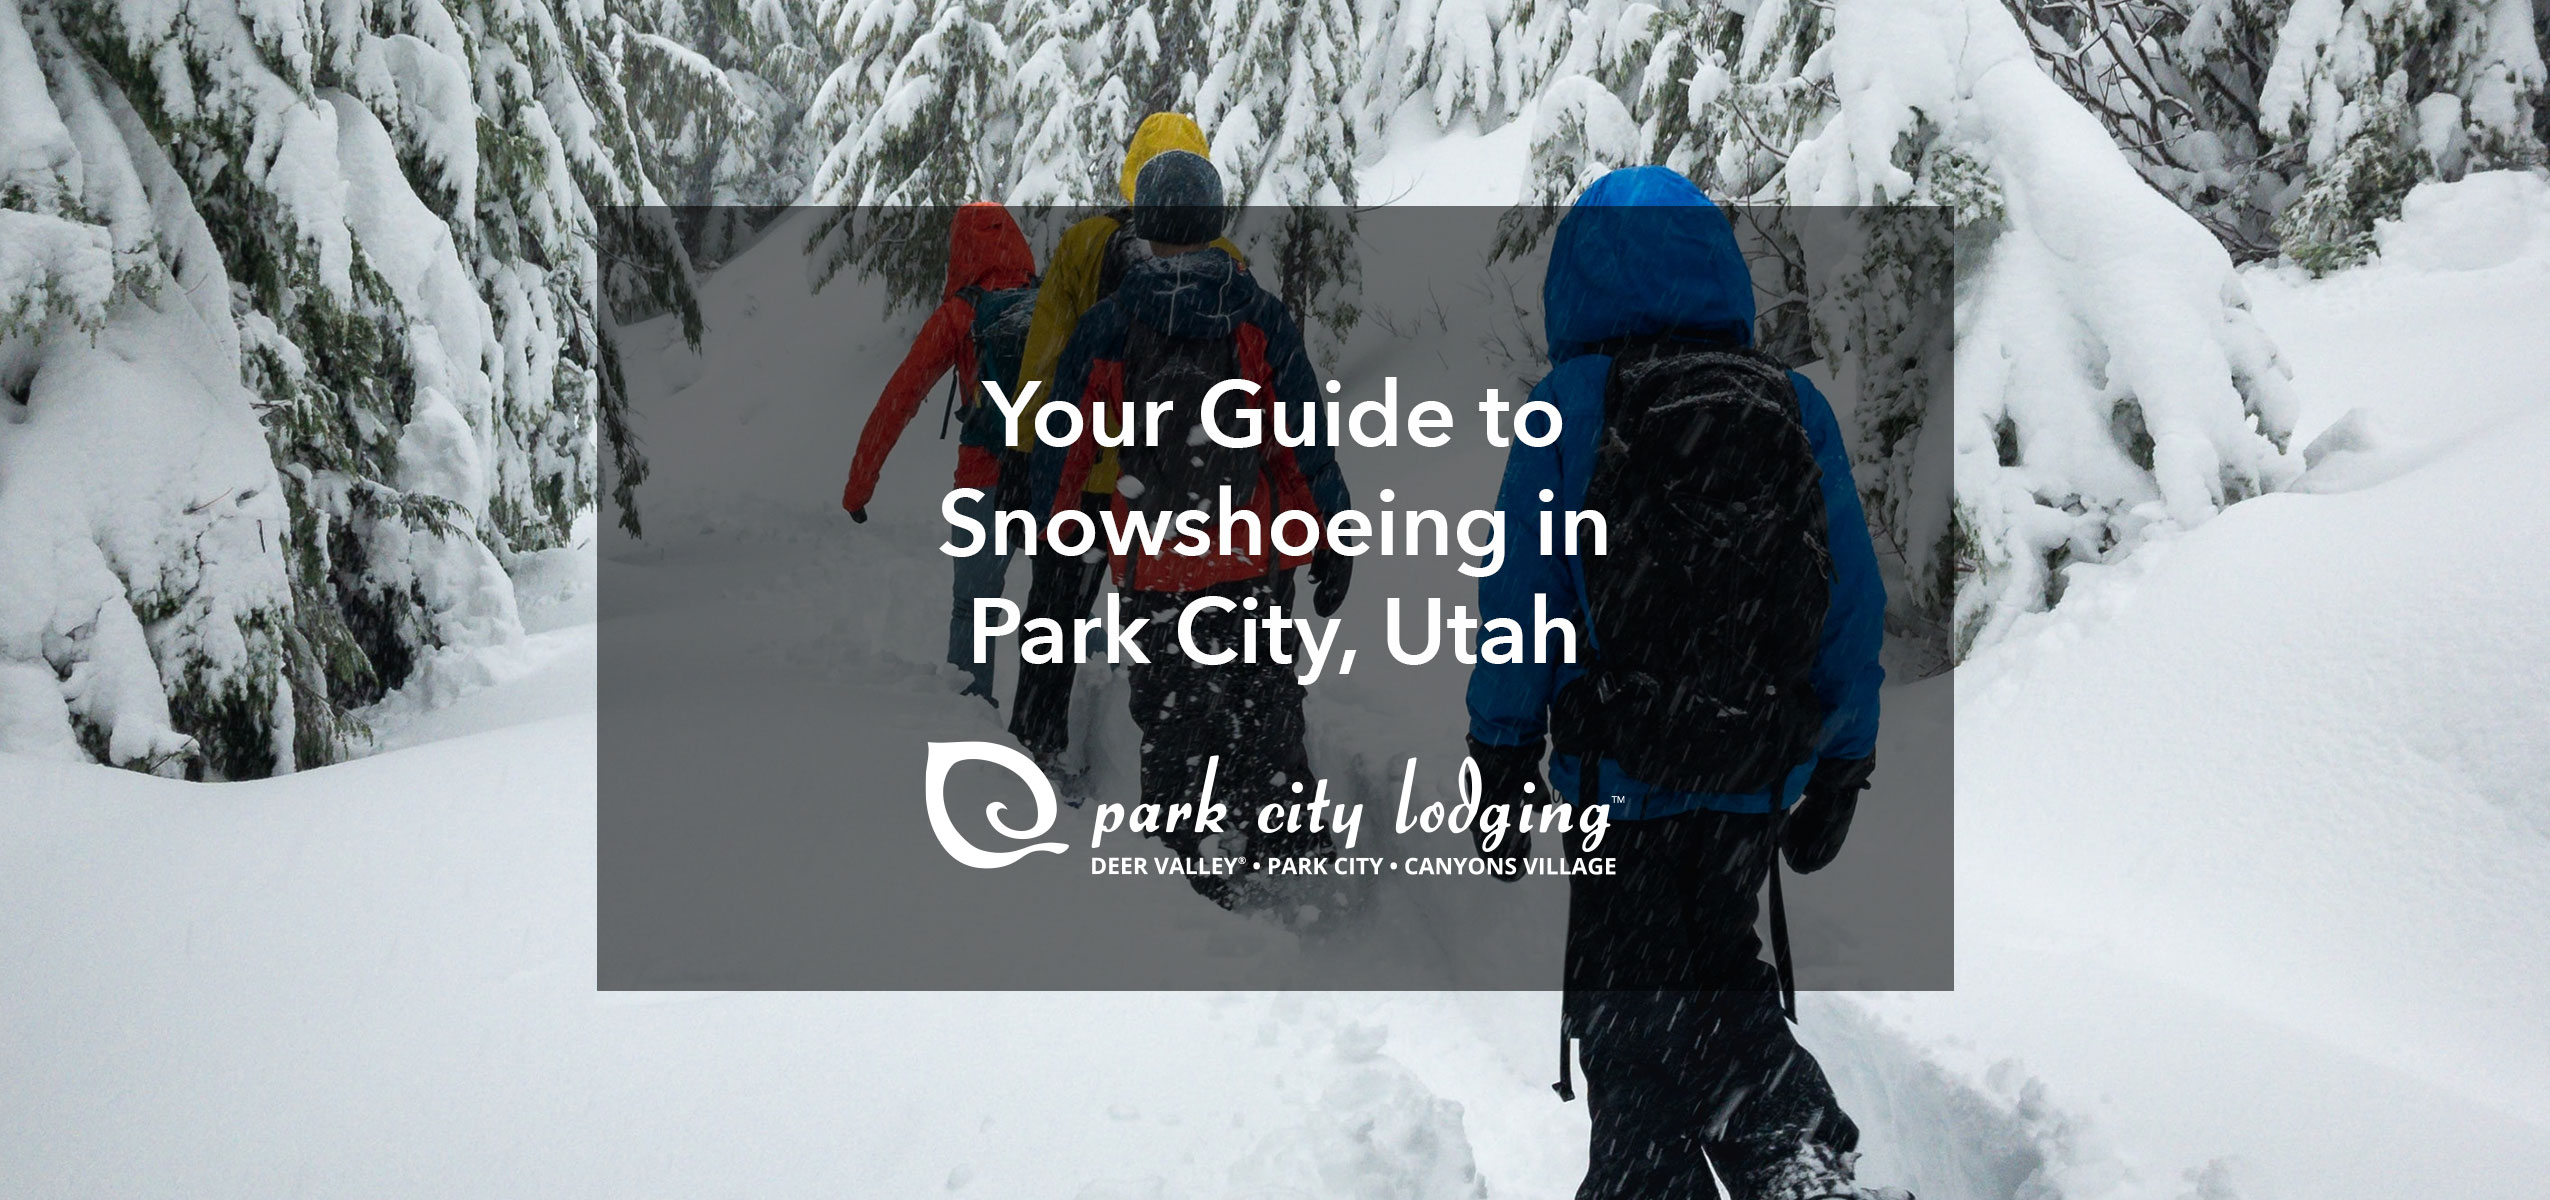 Graphic that says "Your Guide to Snowshoeing in Park City, Utah" with snowshoers in the background.